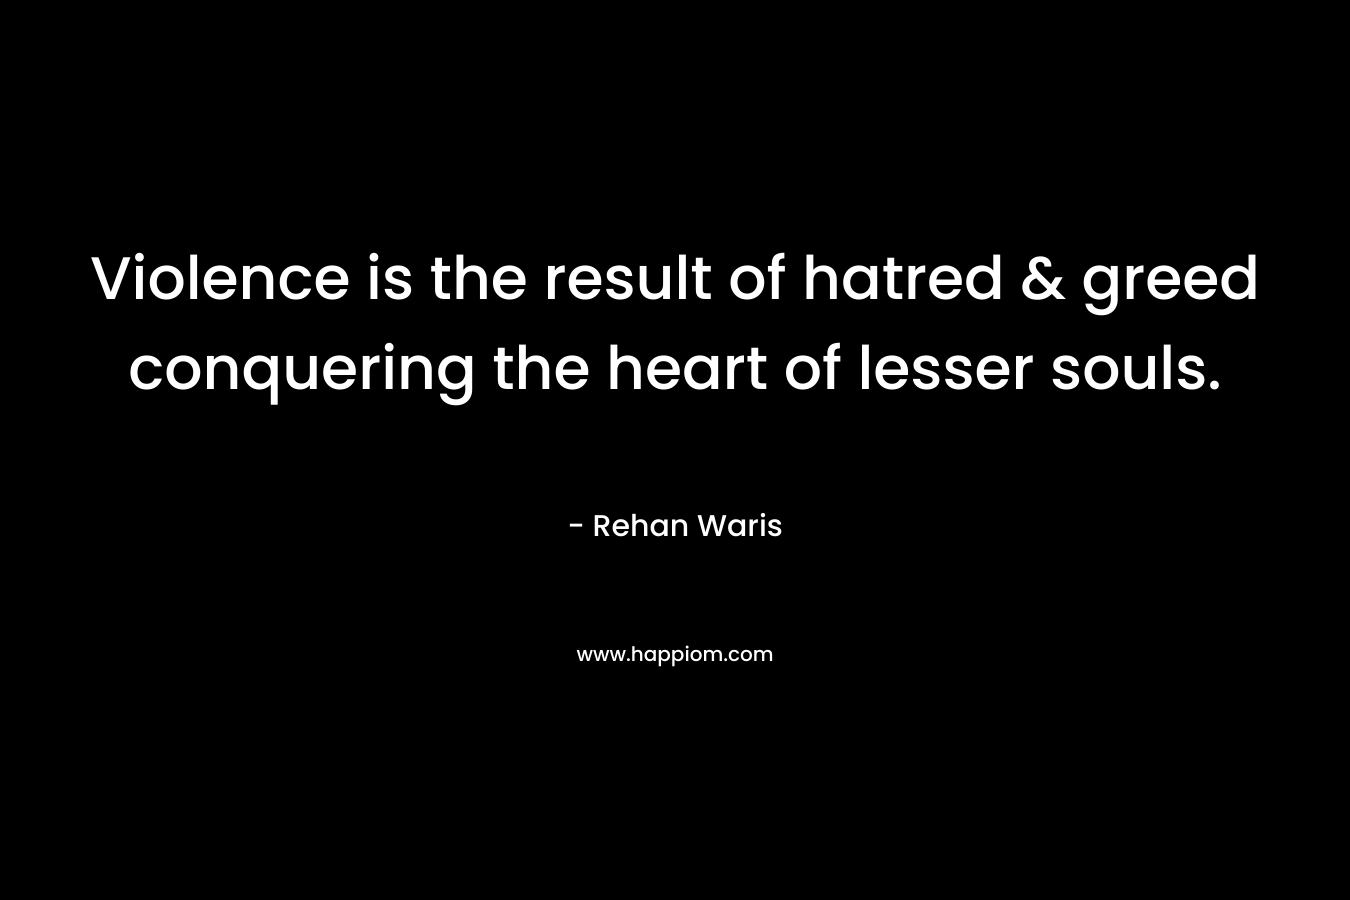 Violence is the result of hatred & greed conquering the heart of lesser souls. – Rehan Waris